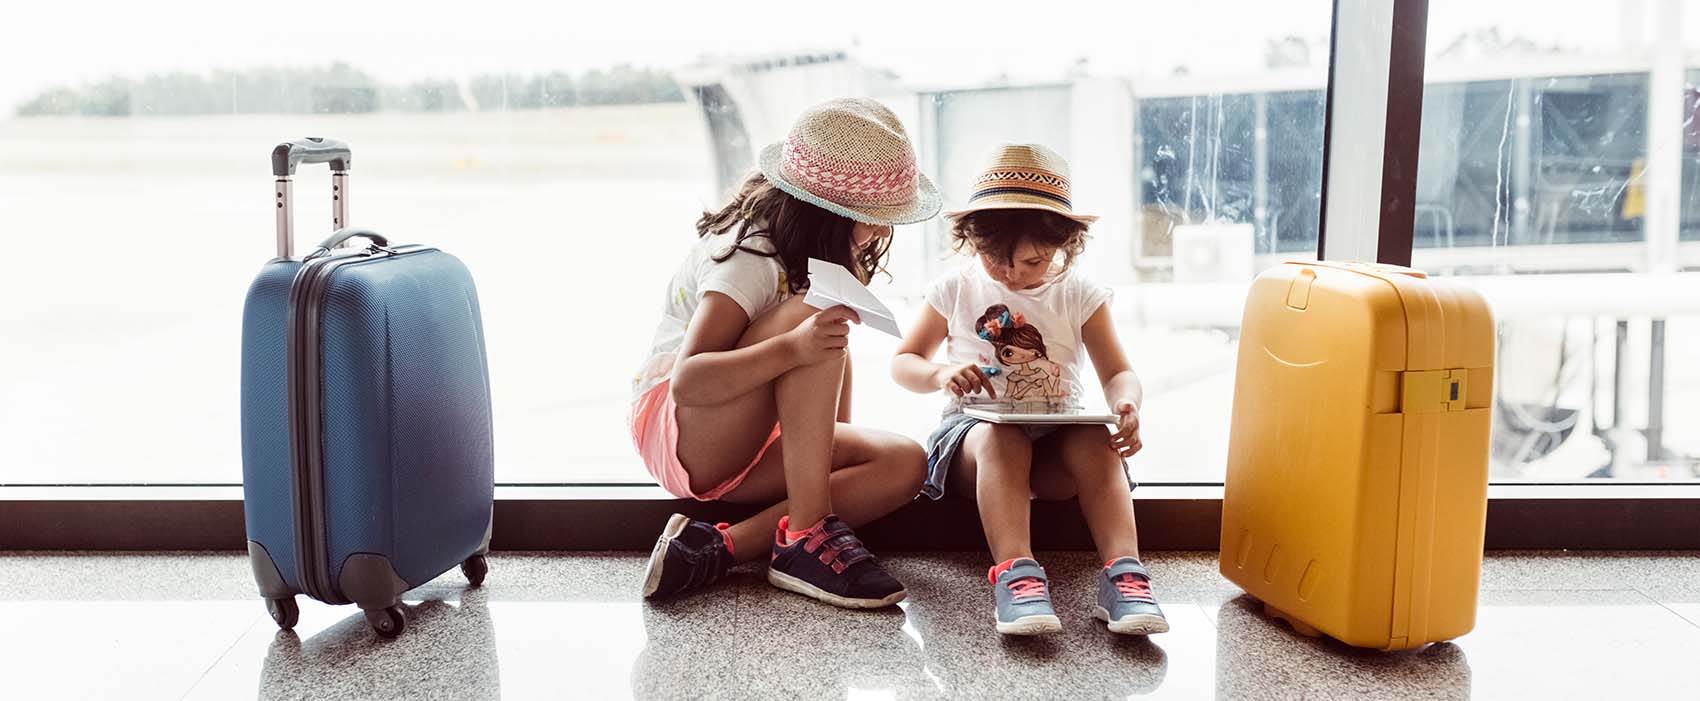 Two little girls waiting at airport, playing with digital tablet